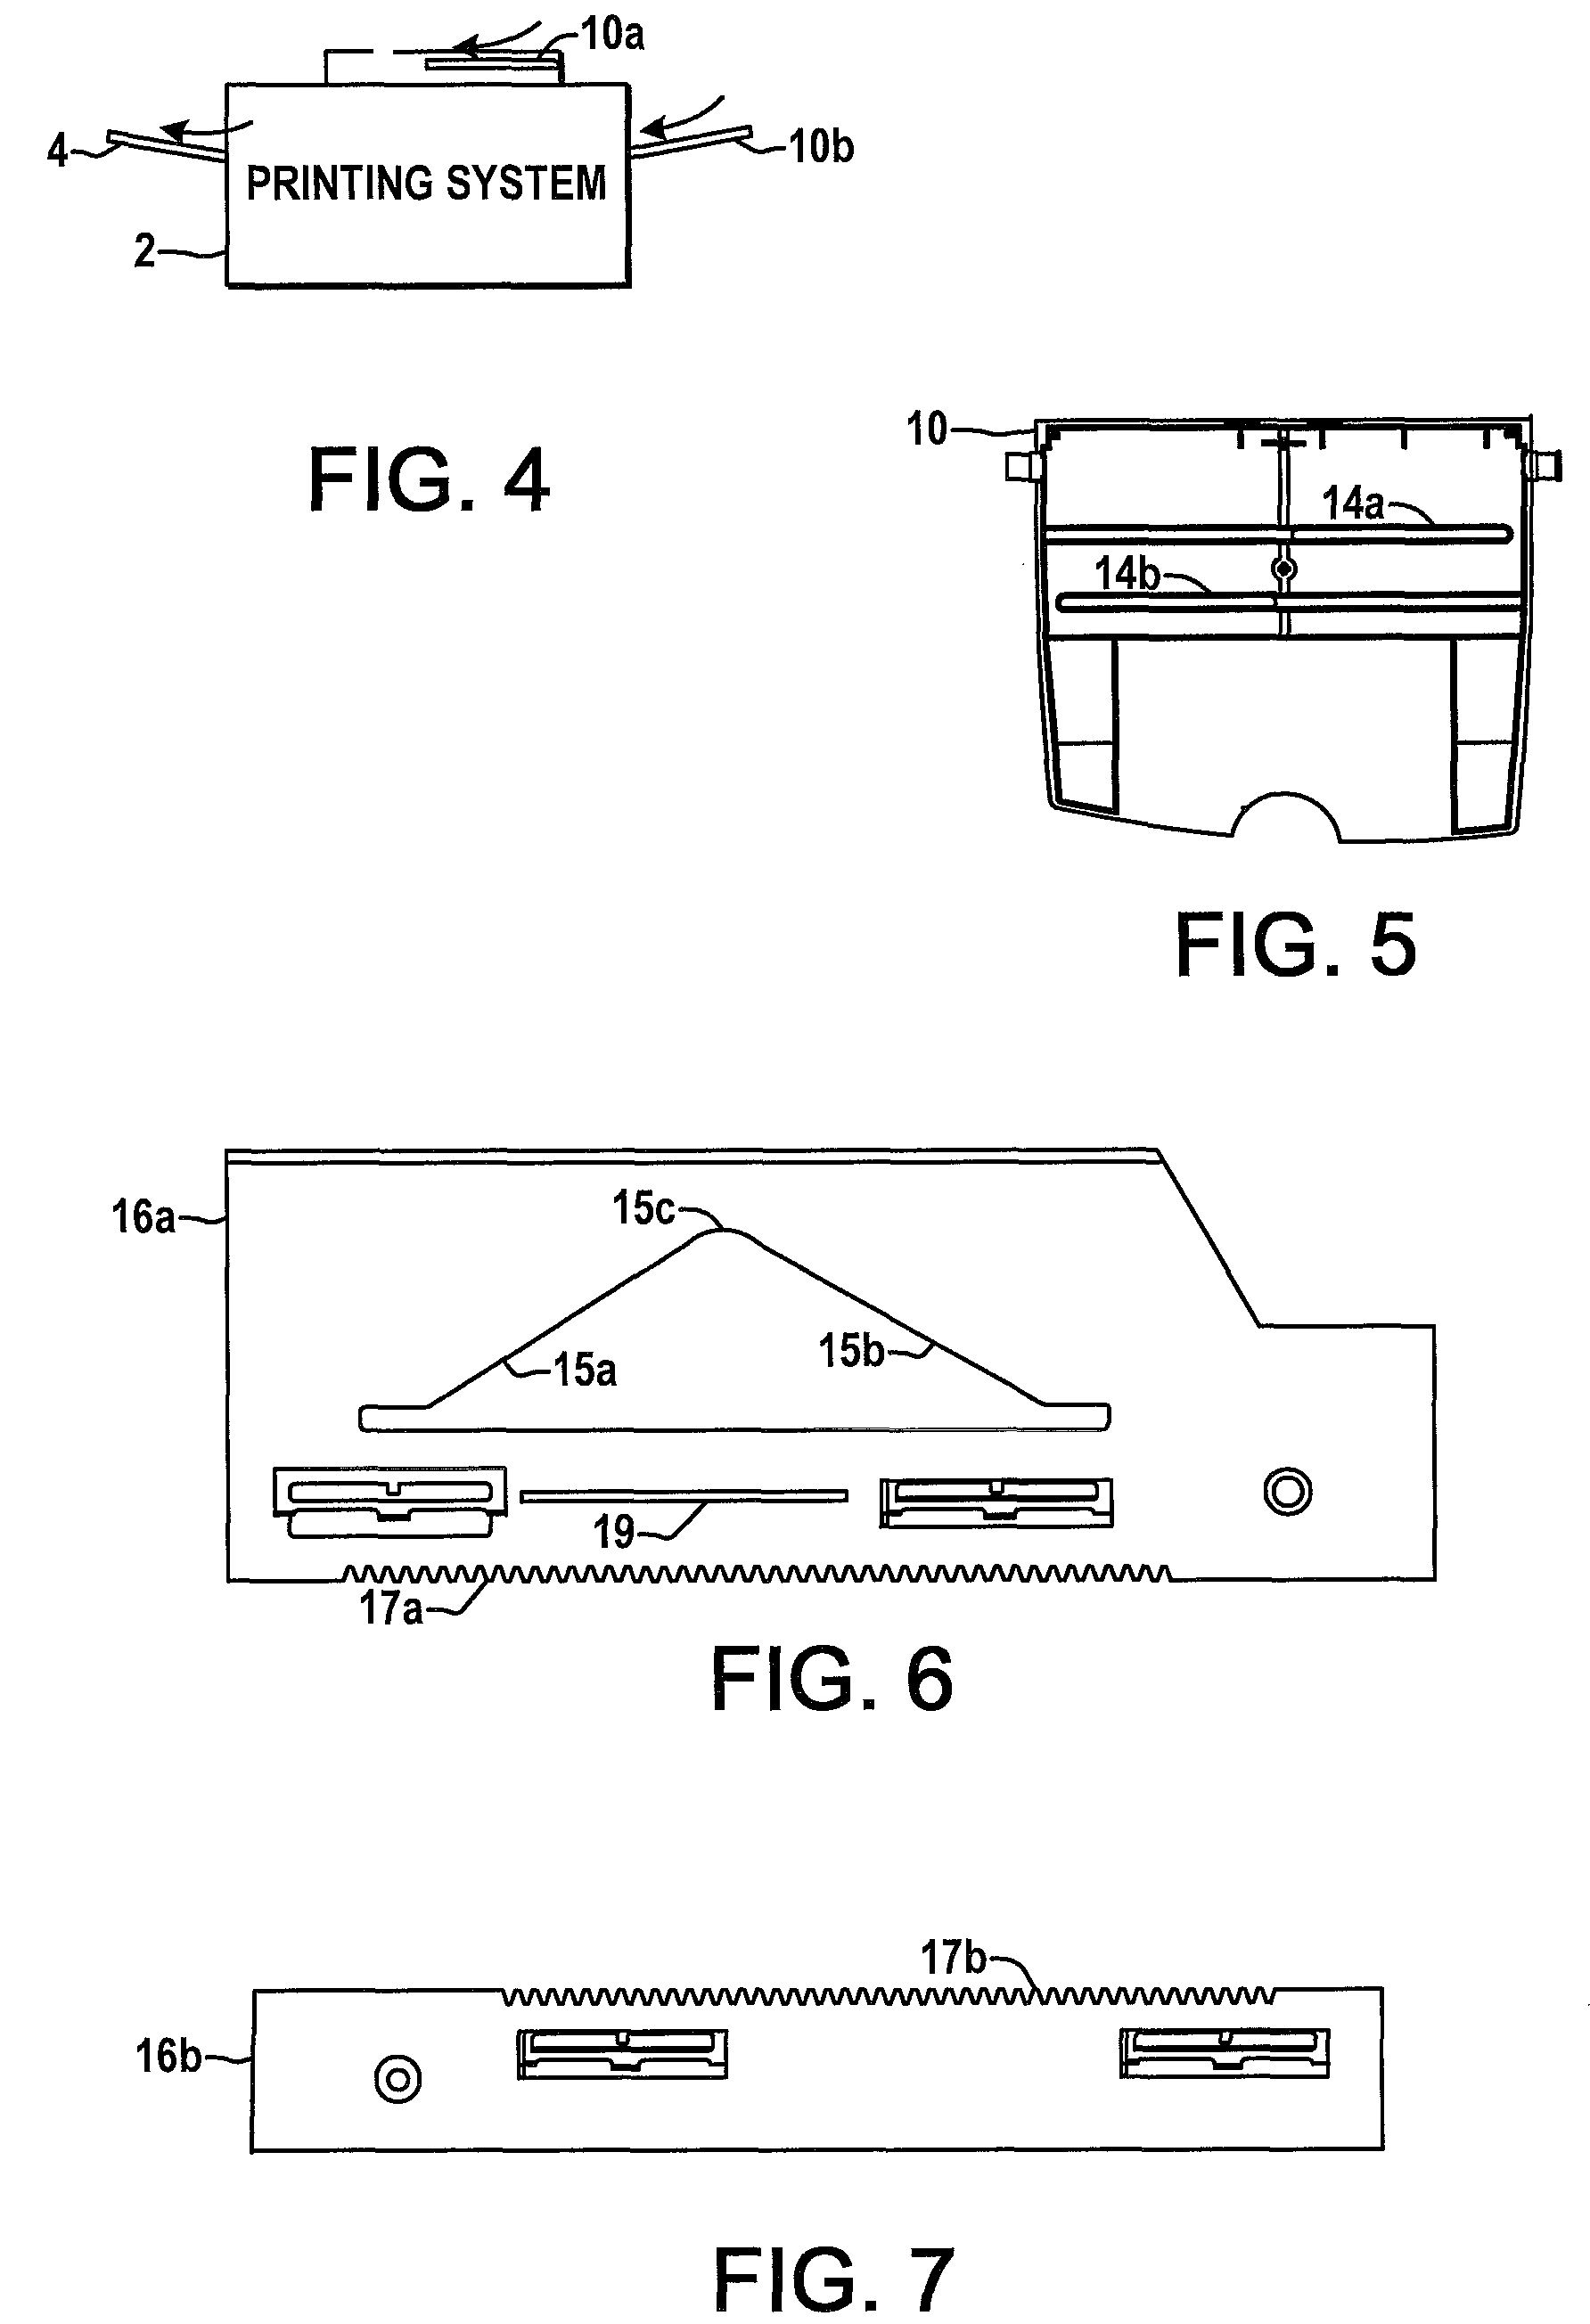 Media feeding and width sensing methods and apparatus for printing systems